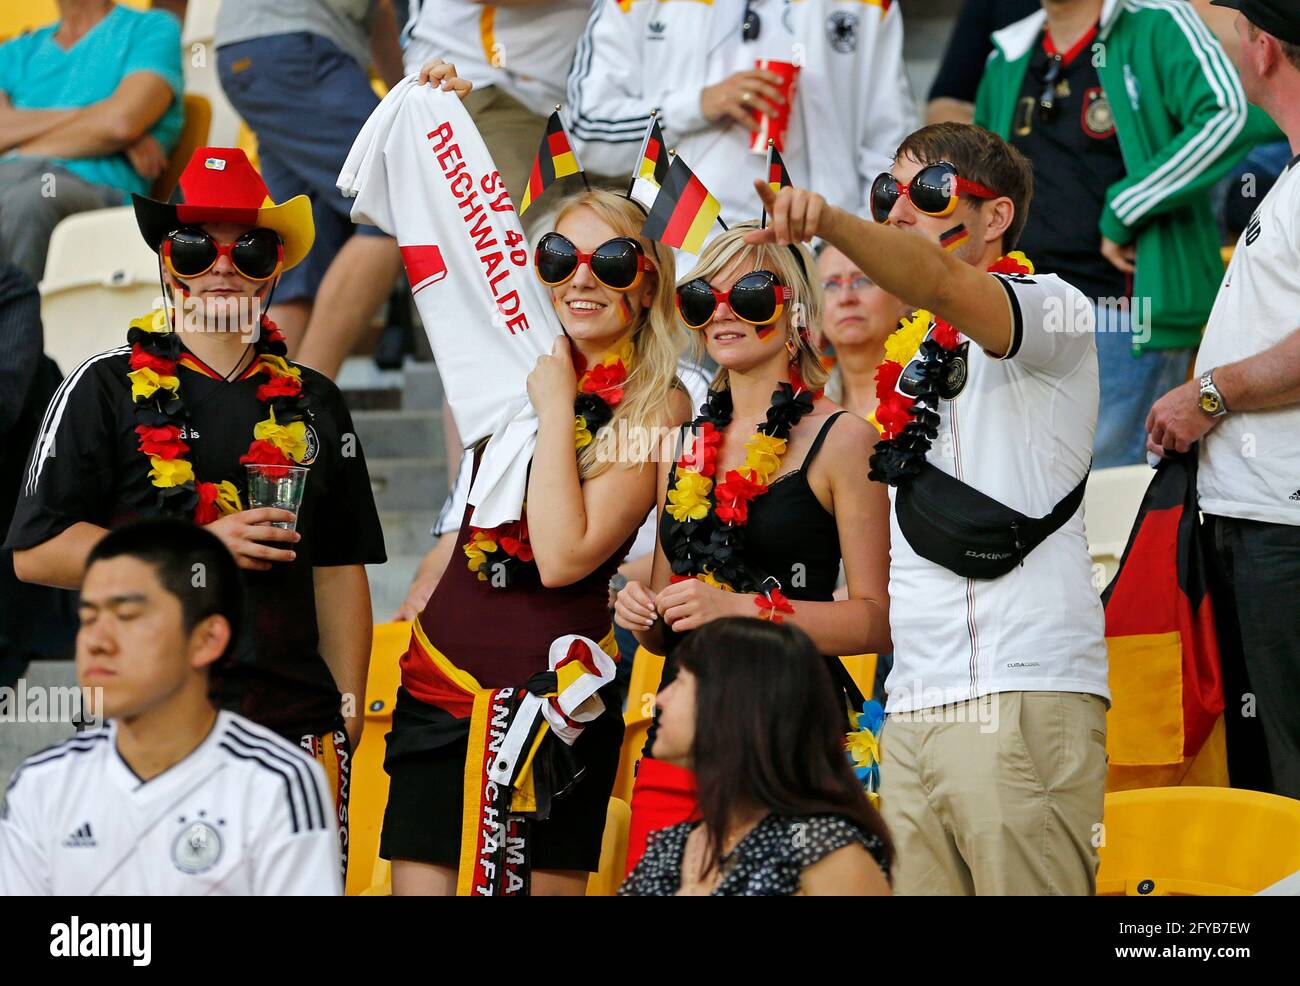 LVIV, UKRAINE - JUNE 17, 2012: German football supporters show their support during the UEFA EURO 2012 game Germany v Denmark at Lviv Arena in Lviv. Germany won 2-1 Stock Photo